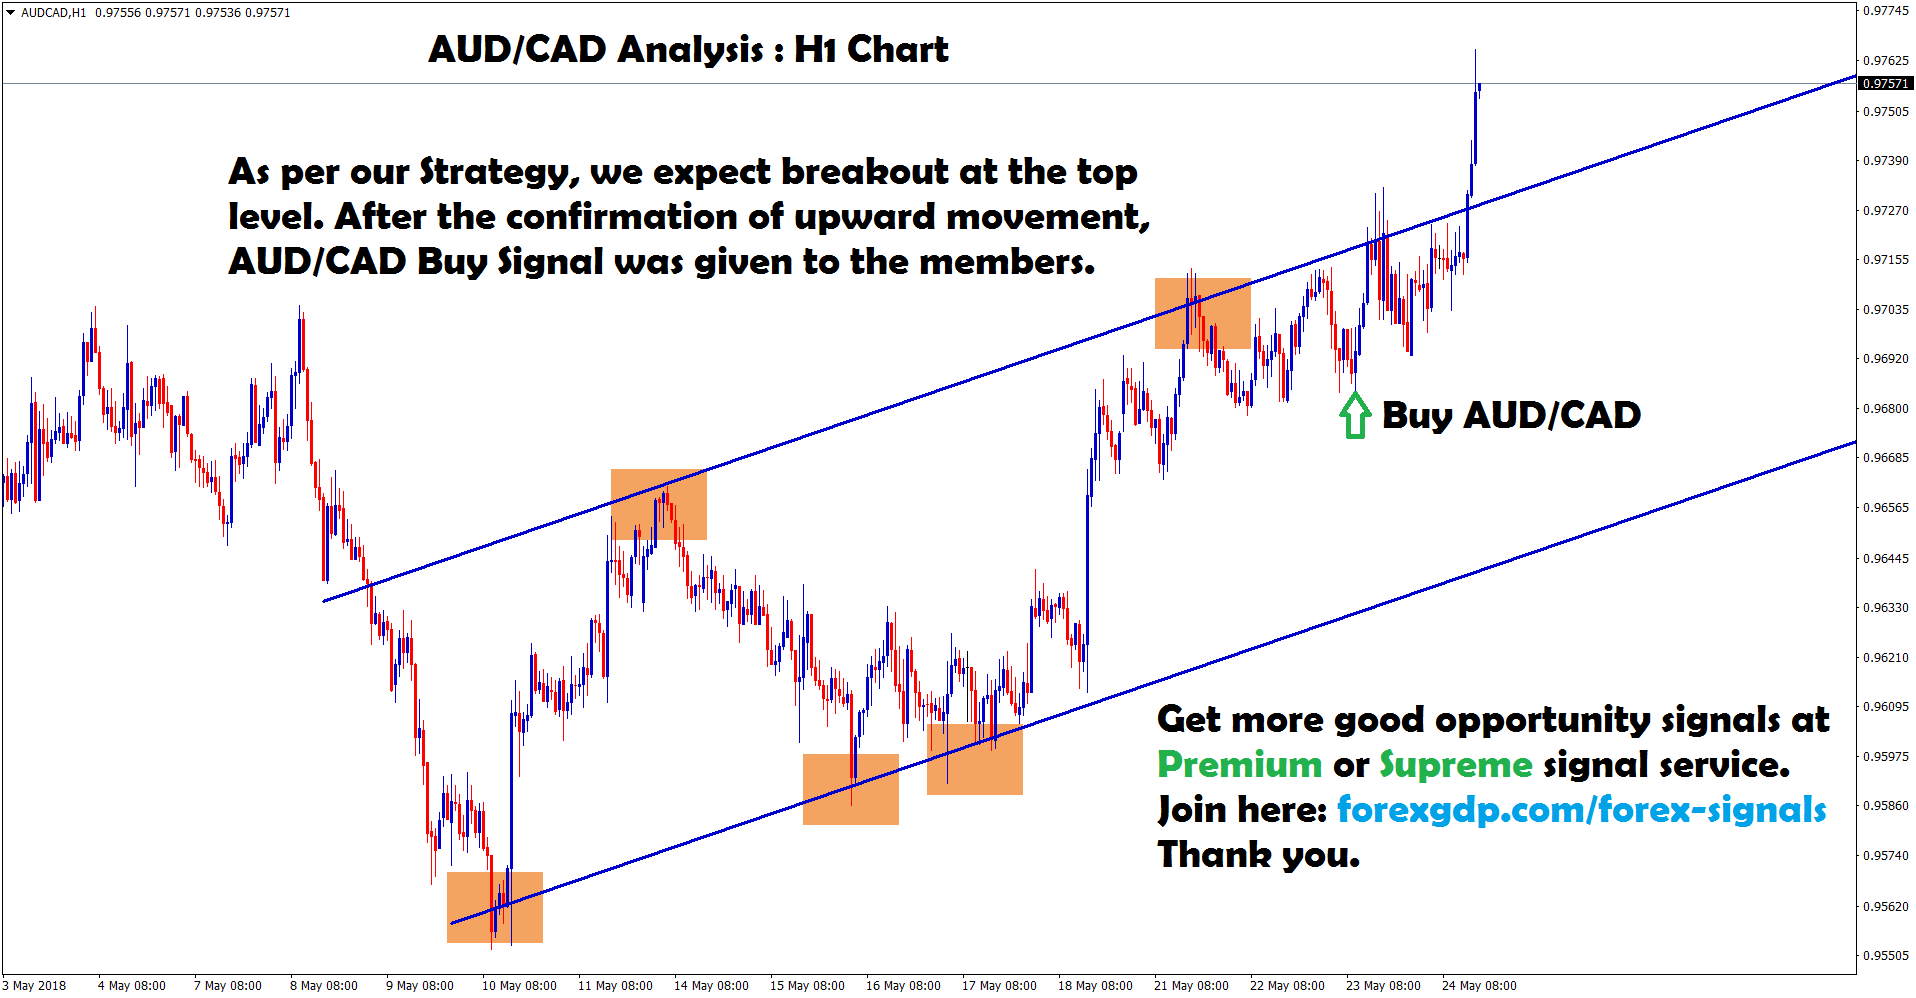 aud cad broken the trend and moving upward